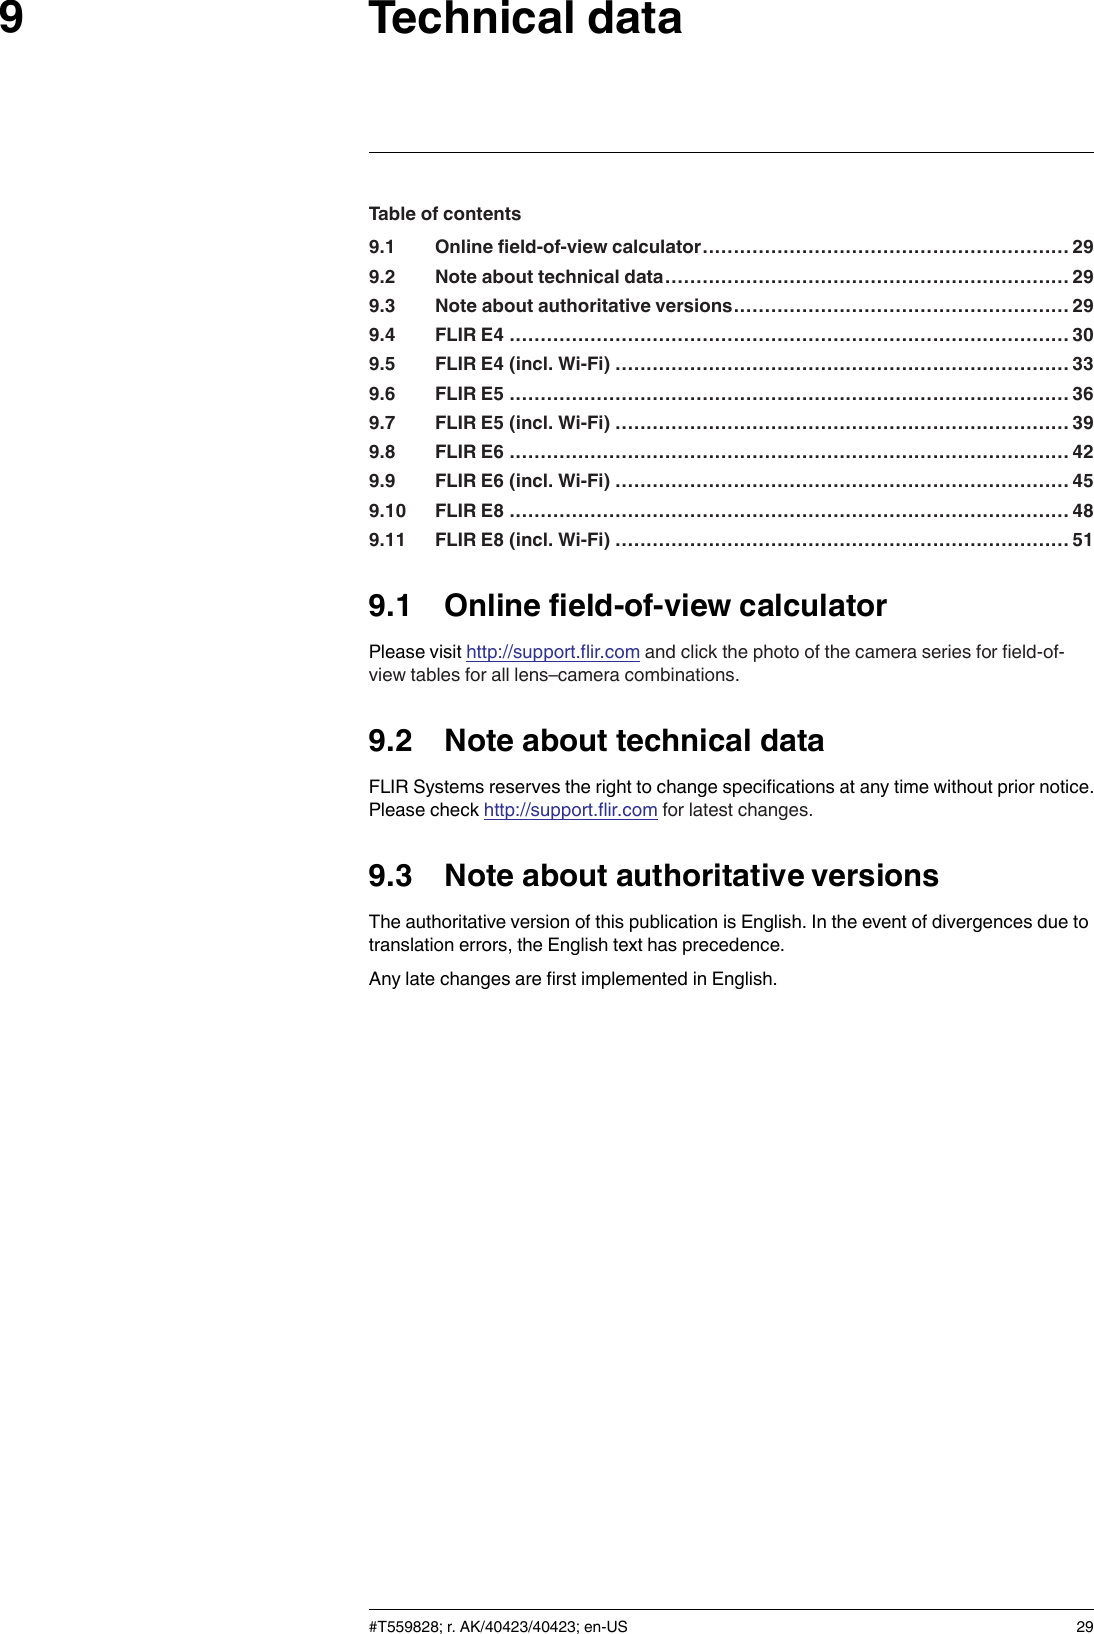 Technical data9Table of contents9.1 Online field-of-view calculator........................................................... 299.2 Note about technical data................................................................. 299.3 Note about authoritative versions...................................................... 299.4 FLIR E4 ..........................................................................................309.5 FLIR E4 (incl. Wi-Fi) ......................................................................... 339.6 FLIR E5 ..........................................................................................369.7 FLIR E5 (incl. Wi-Fi) ......................................................................... 399.8 FLIR E6 ..........................................................................................429.9 FLIR E6 (incl. Wi-Fi) ......................................................................... 459.10 FLIR E8 ..........................................................................................489.11 FLIR E8 (incl. Wi-Fi) ......................................................................... 519.1 Online field-of-view calculatorPlease visit http://support.flir.com and click the photo of the camera series for field-of-view tables for all lens–camera combinations.9.2 Note about technical dataFLIR Systems reserves the right to change specifications at any time without prior notice.Please check http://support.flir.com for latest changes.9.3 Note about authoritative versionsThe authoritative version of this publication is English. In the event of divergences due totranslation errors, the English text has precedence.Any late changes are first implemented in English.#T559828; r. AK/40423/40423; en-US 29